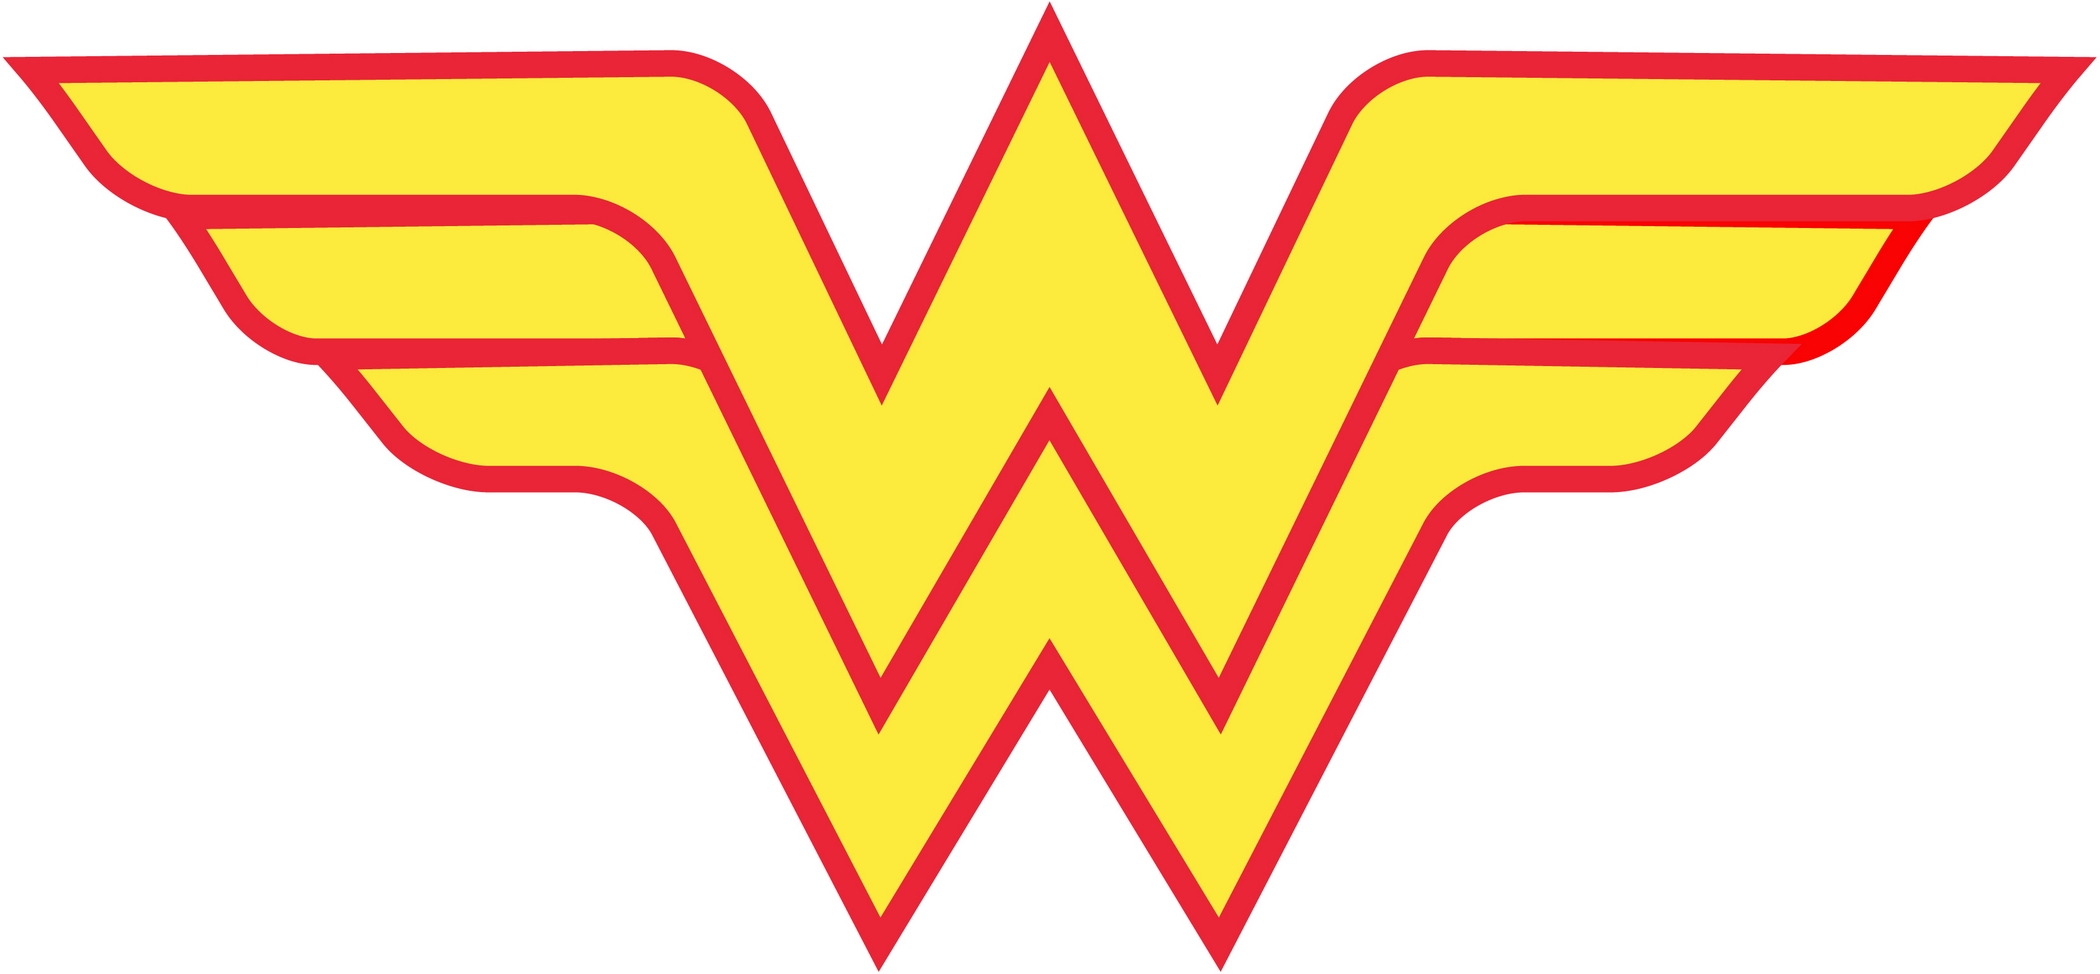 There Is 10 Wonder Woman Border Free Clipart All Used For Free